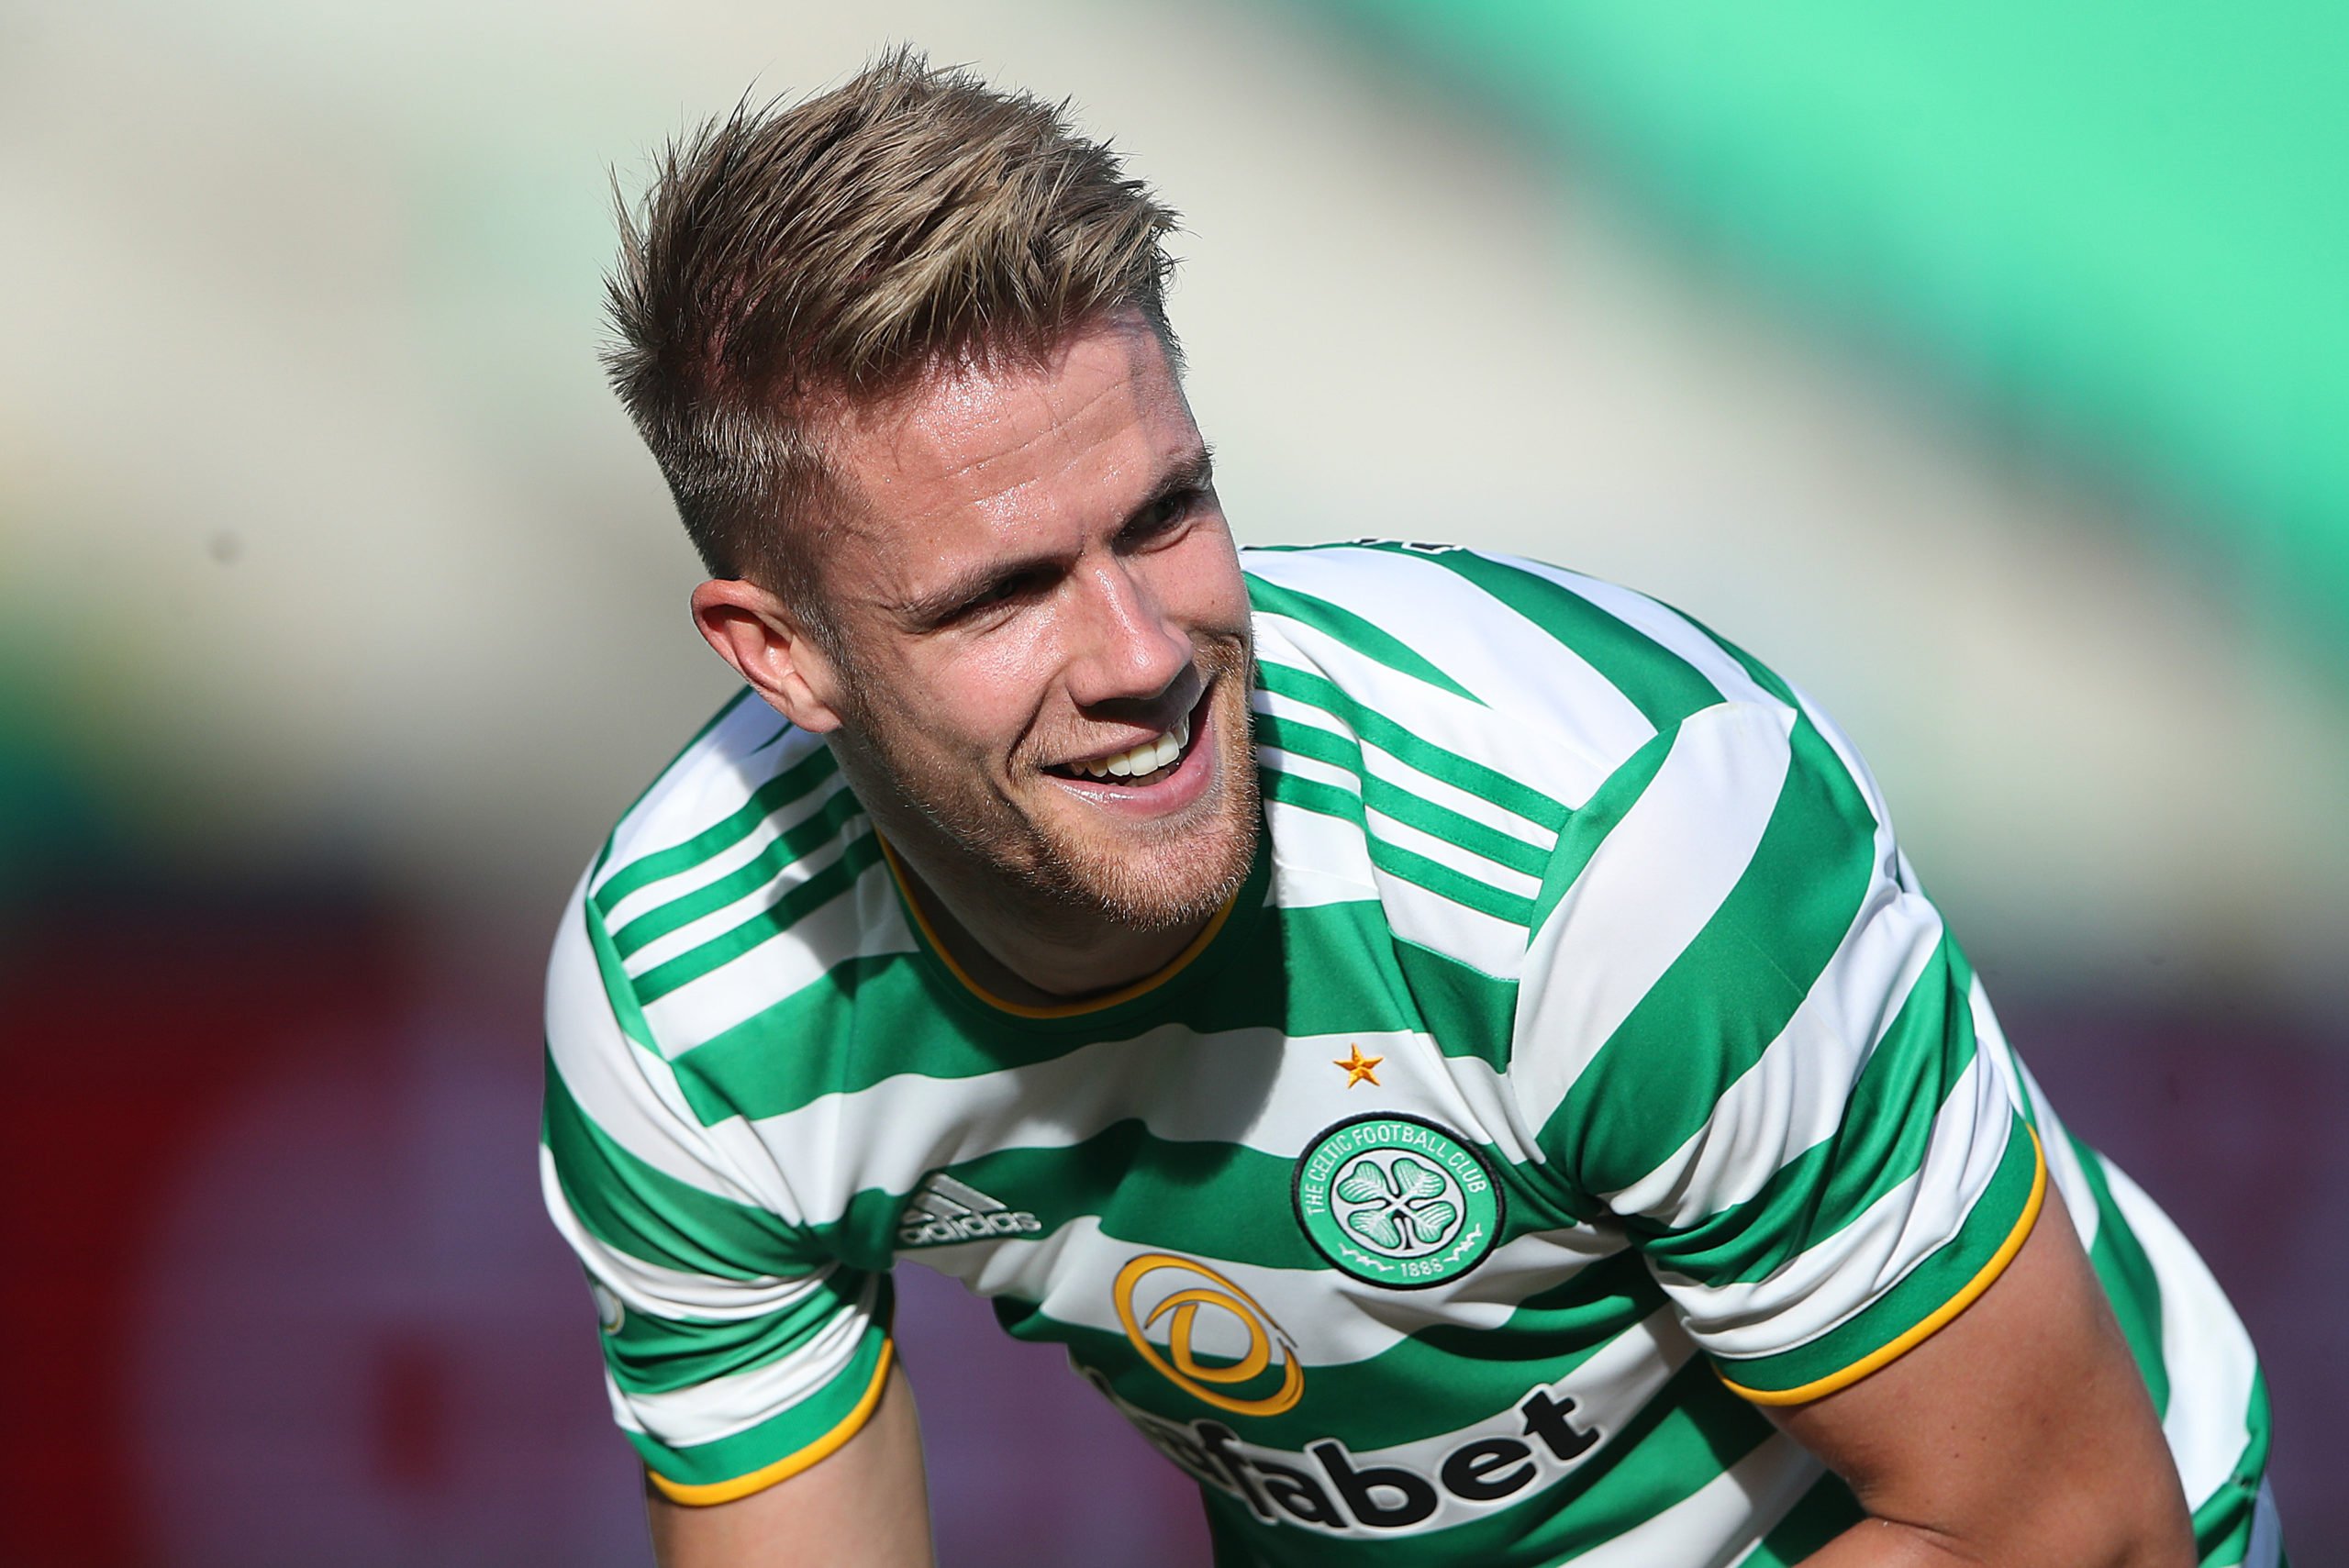 "New contract"; Celtic fans laud birthday Bhoy Kristoffer Ajer